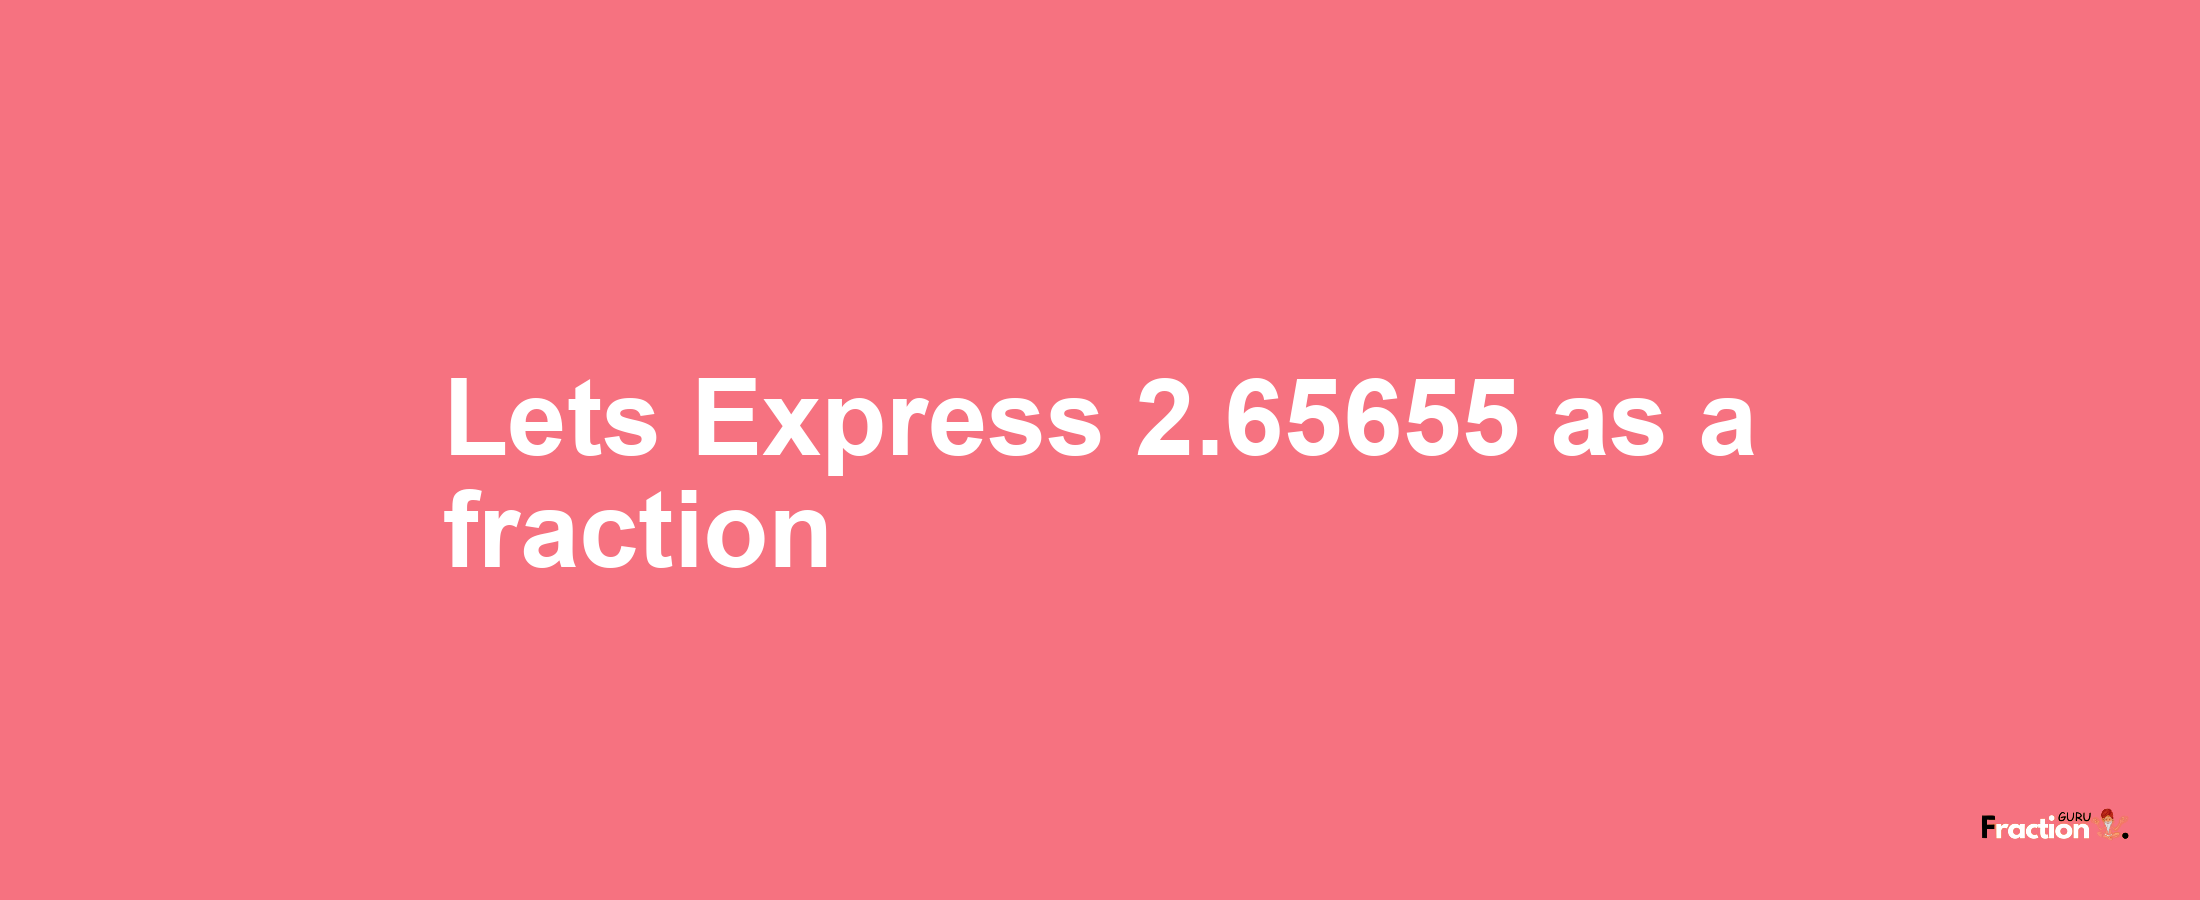 Lets Express 2.65655 as afraction